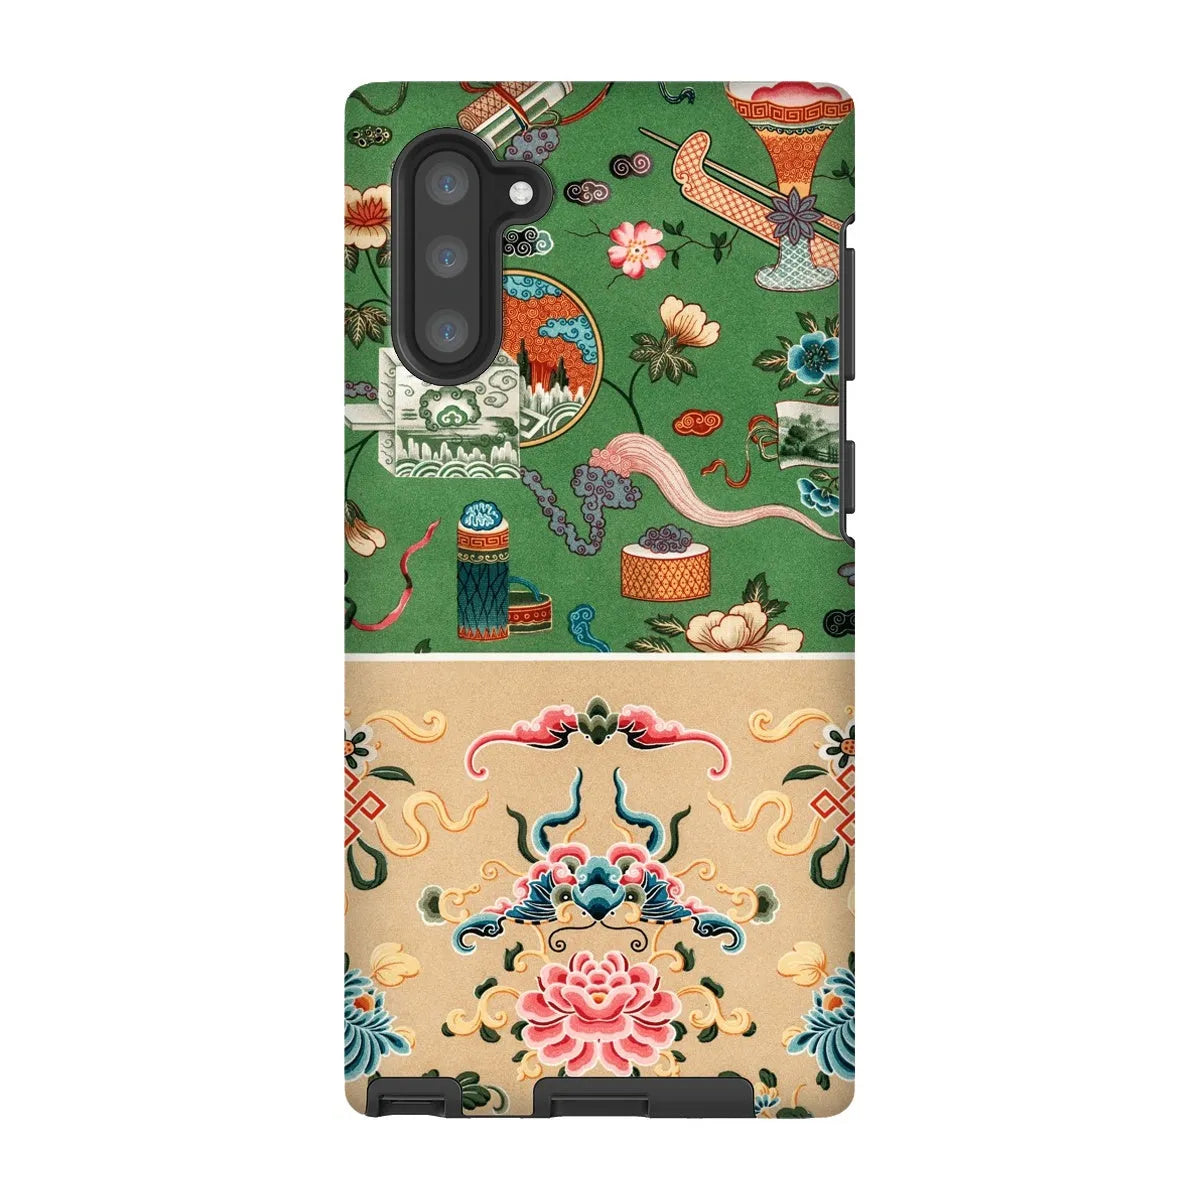 This Chinese Pattern By Auguste Racinet Tough Phone Case - Samsung Galaxy Note 10 / Matte - Mobile Phone Cases